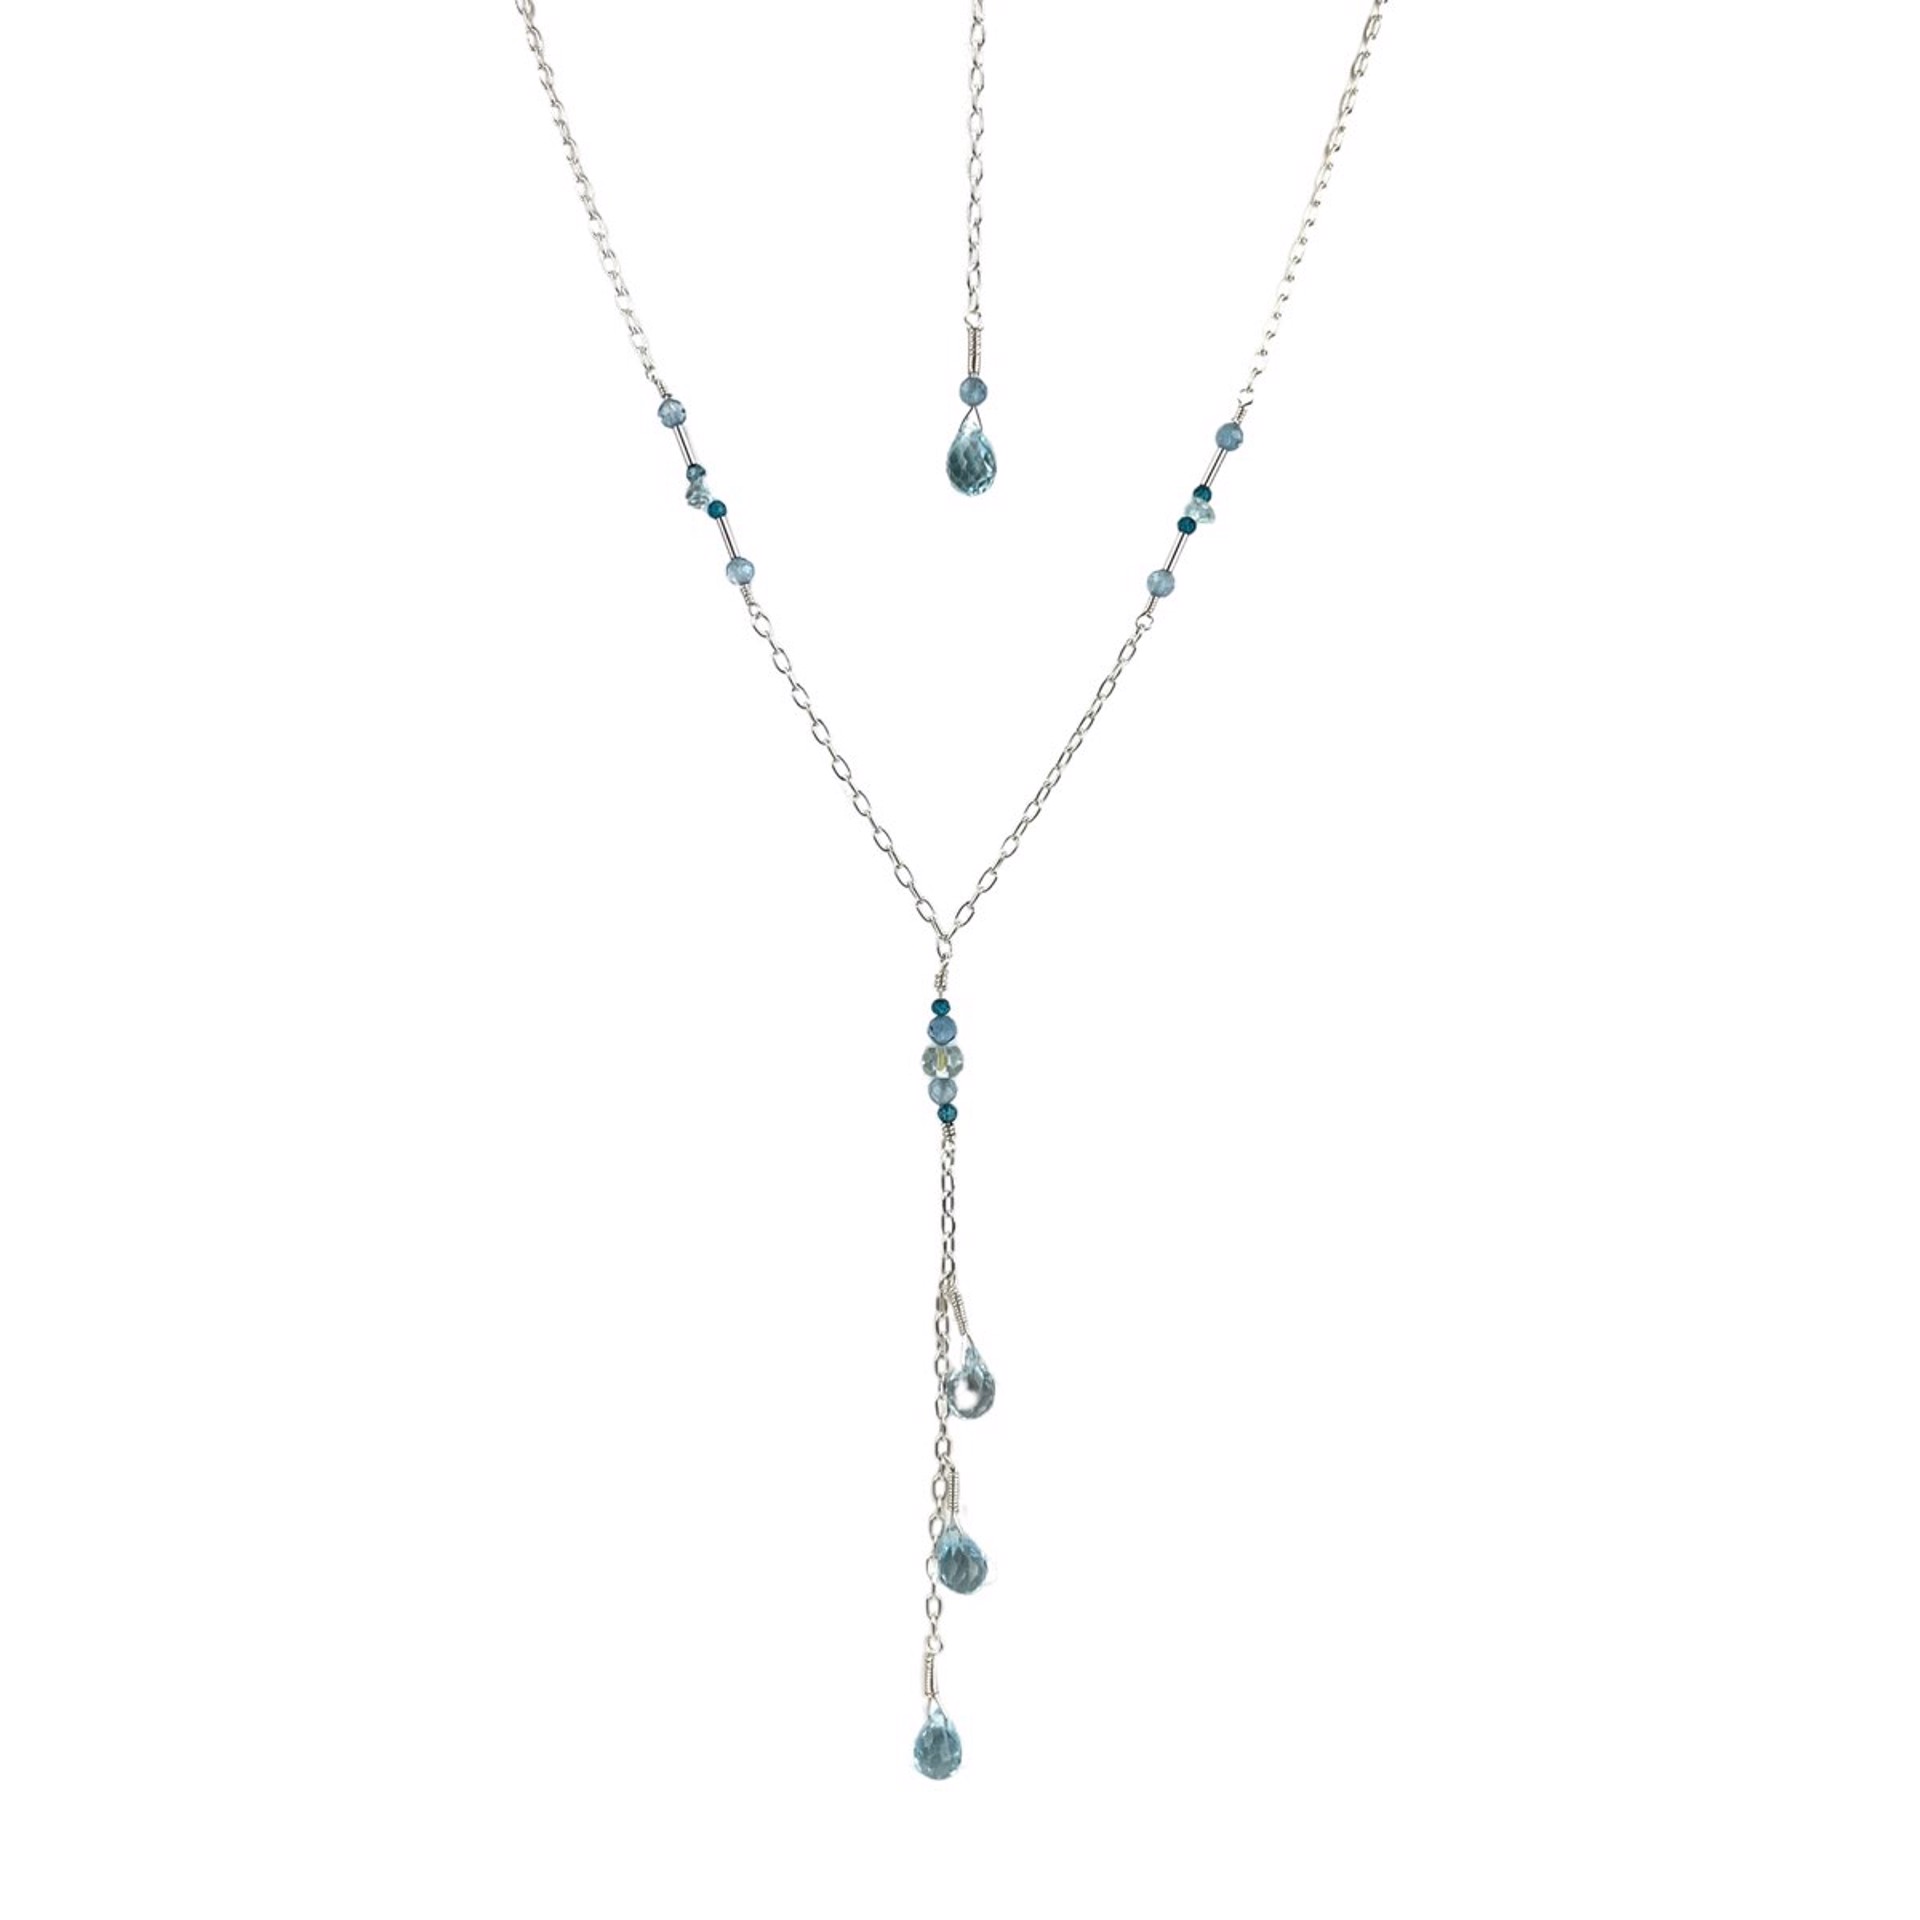 Sky Blue Topaz Faceted Teardrop Waterfall Sterling Silver Necklace with Infinity Pendant by Lisa Kelley